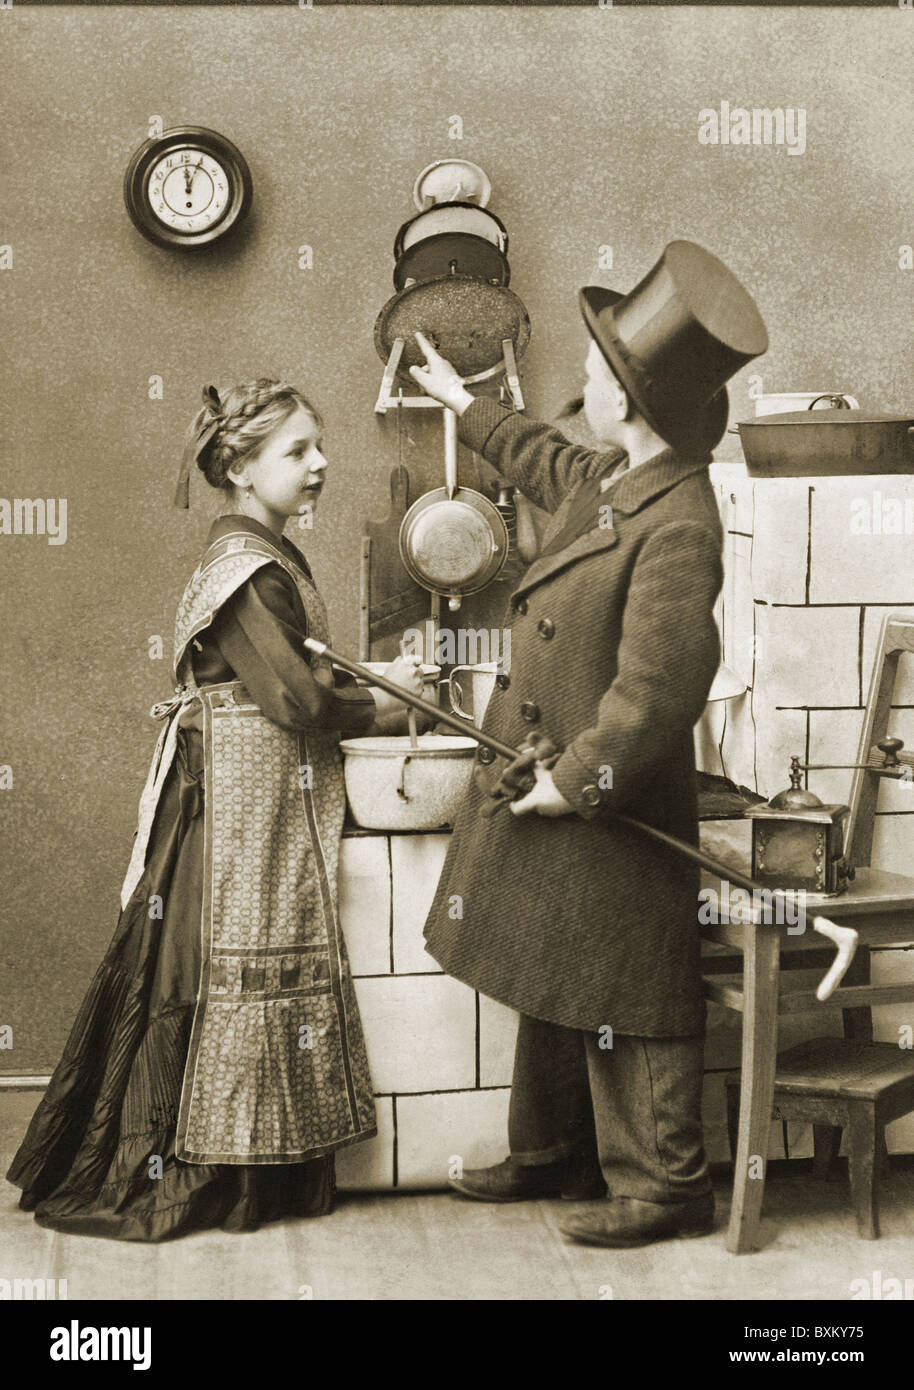 people, couples, couple in dispute about lunch time, Germany, circa 1912, Additional-Rights-Clearences-Not Available Stock Photo